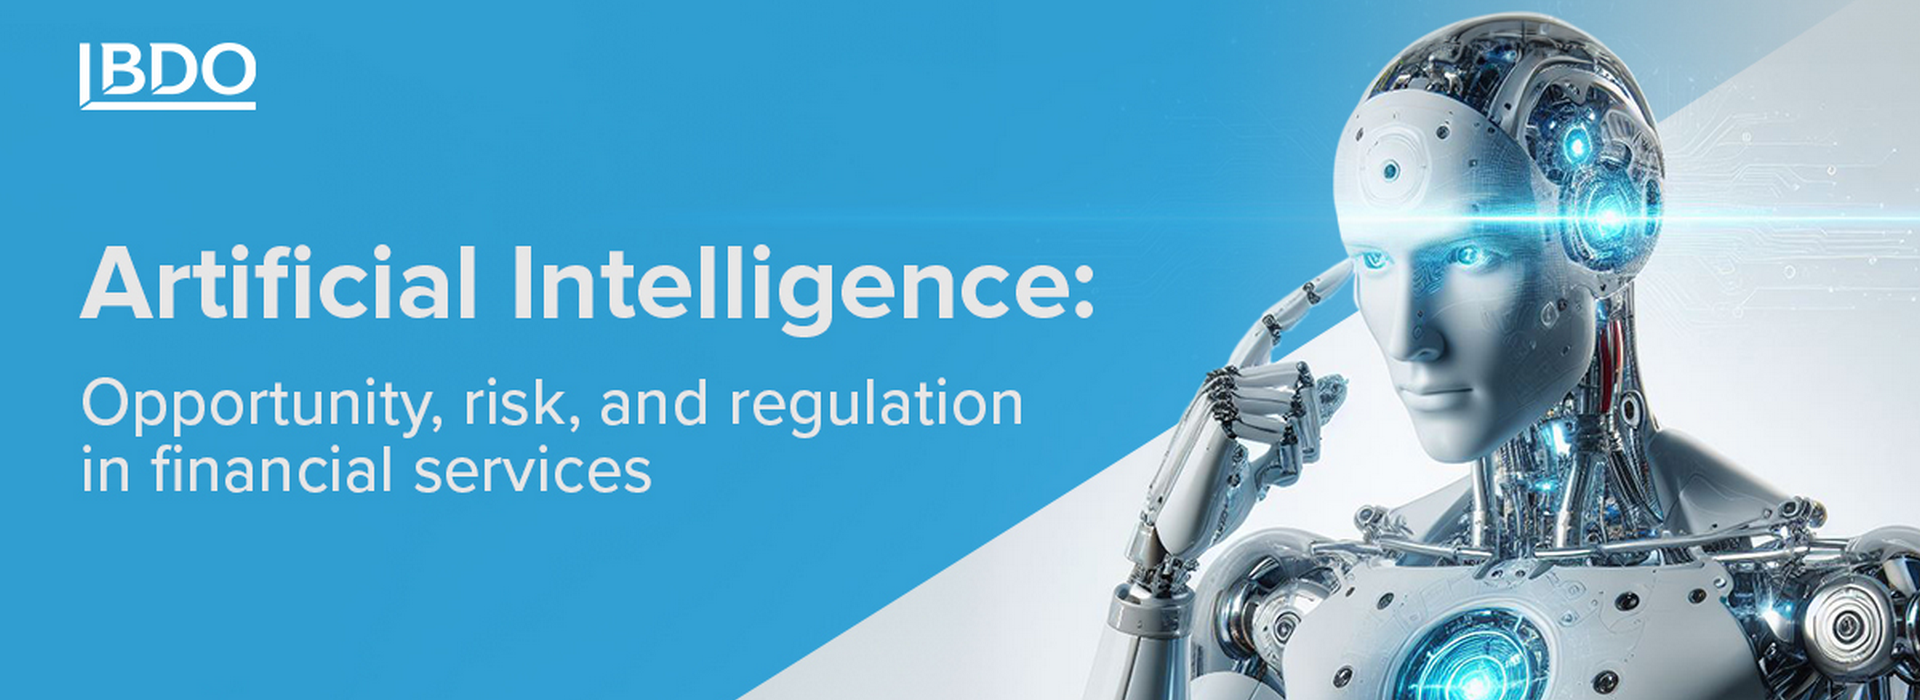 Artificial Intelligence: Opportunity, Risk, and Regulation in Financial Services